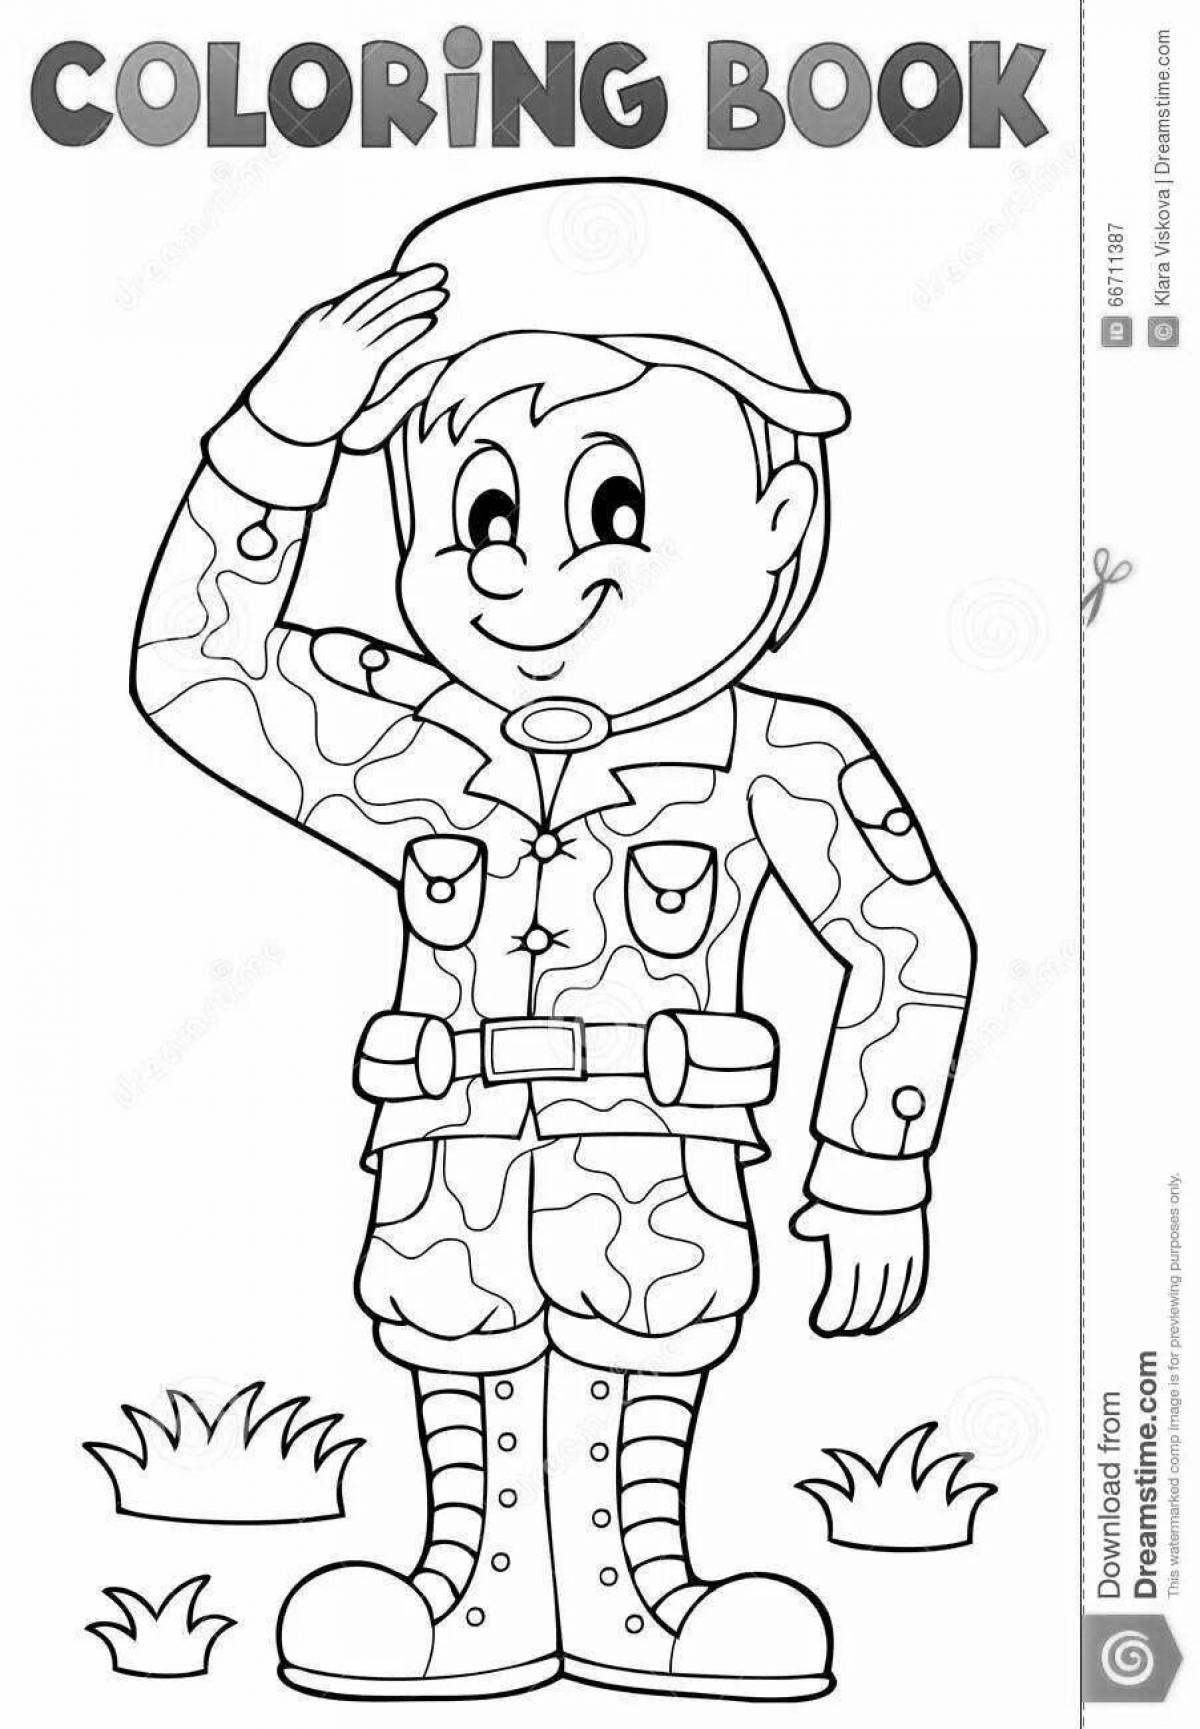 Minute soldier coloring page